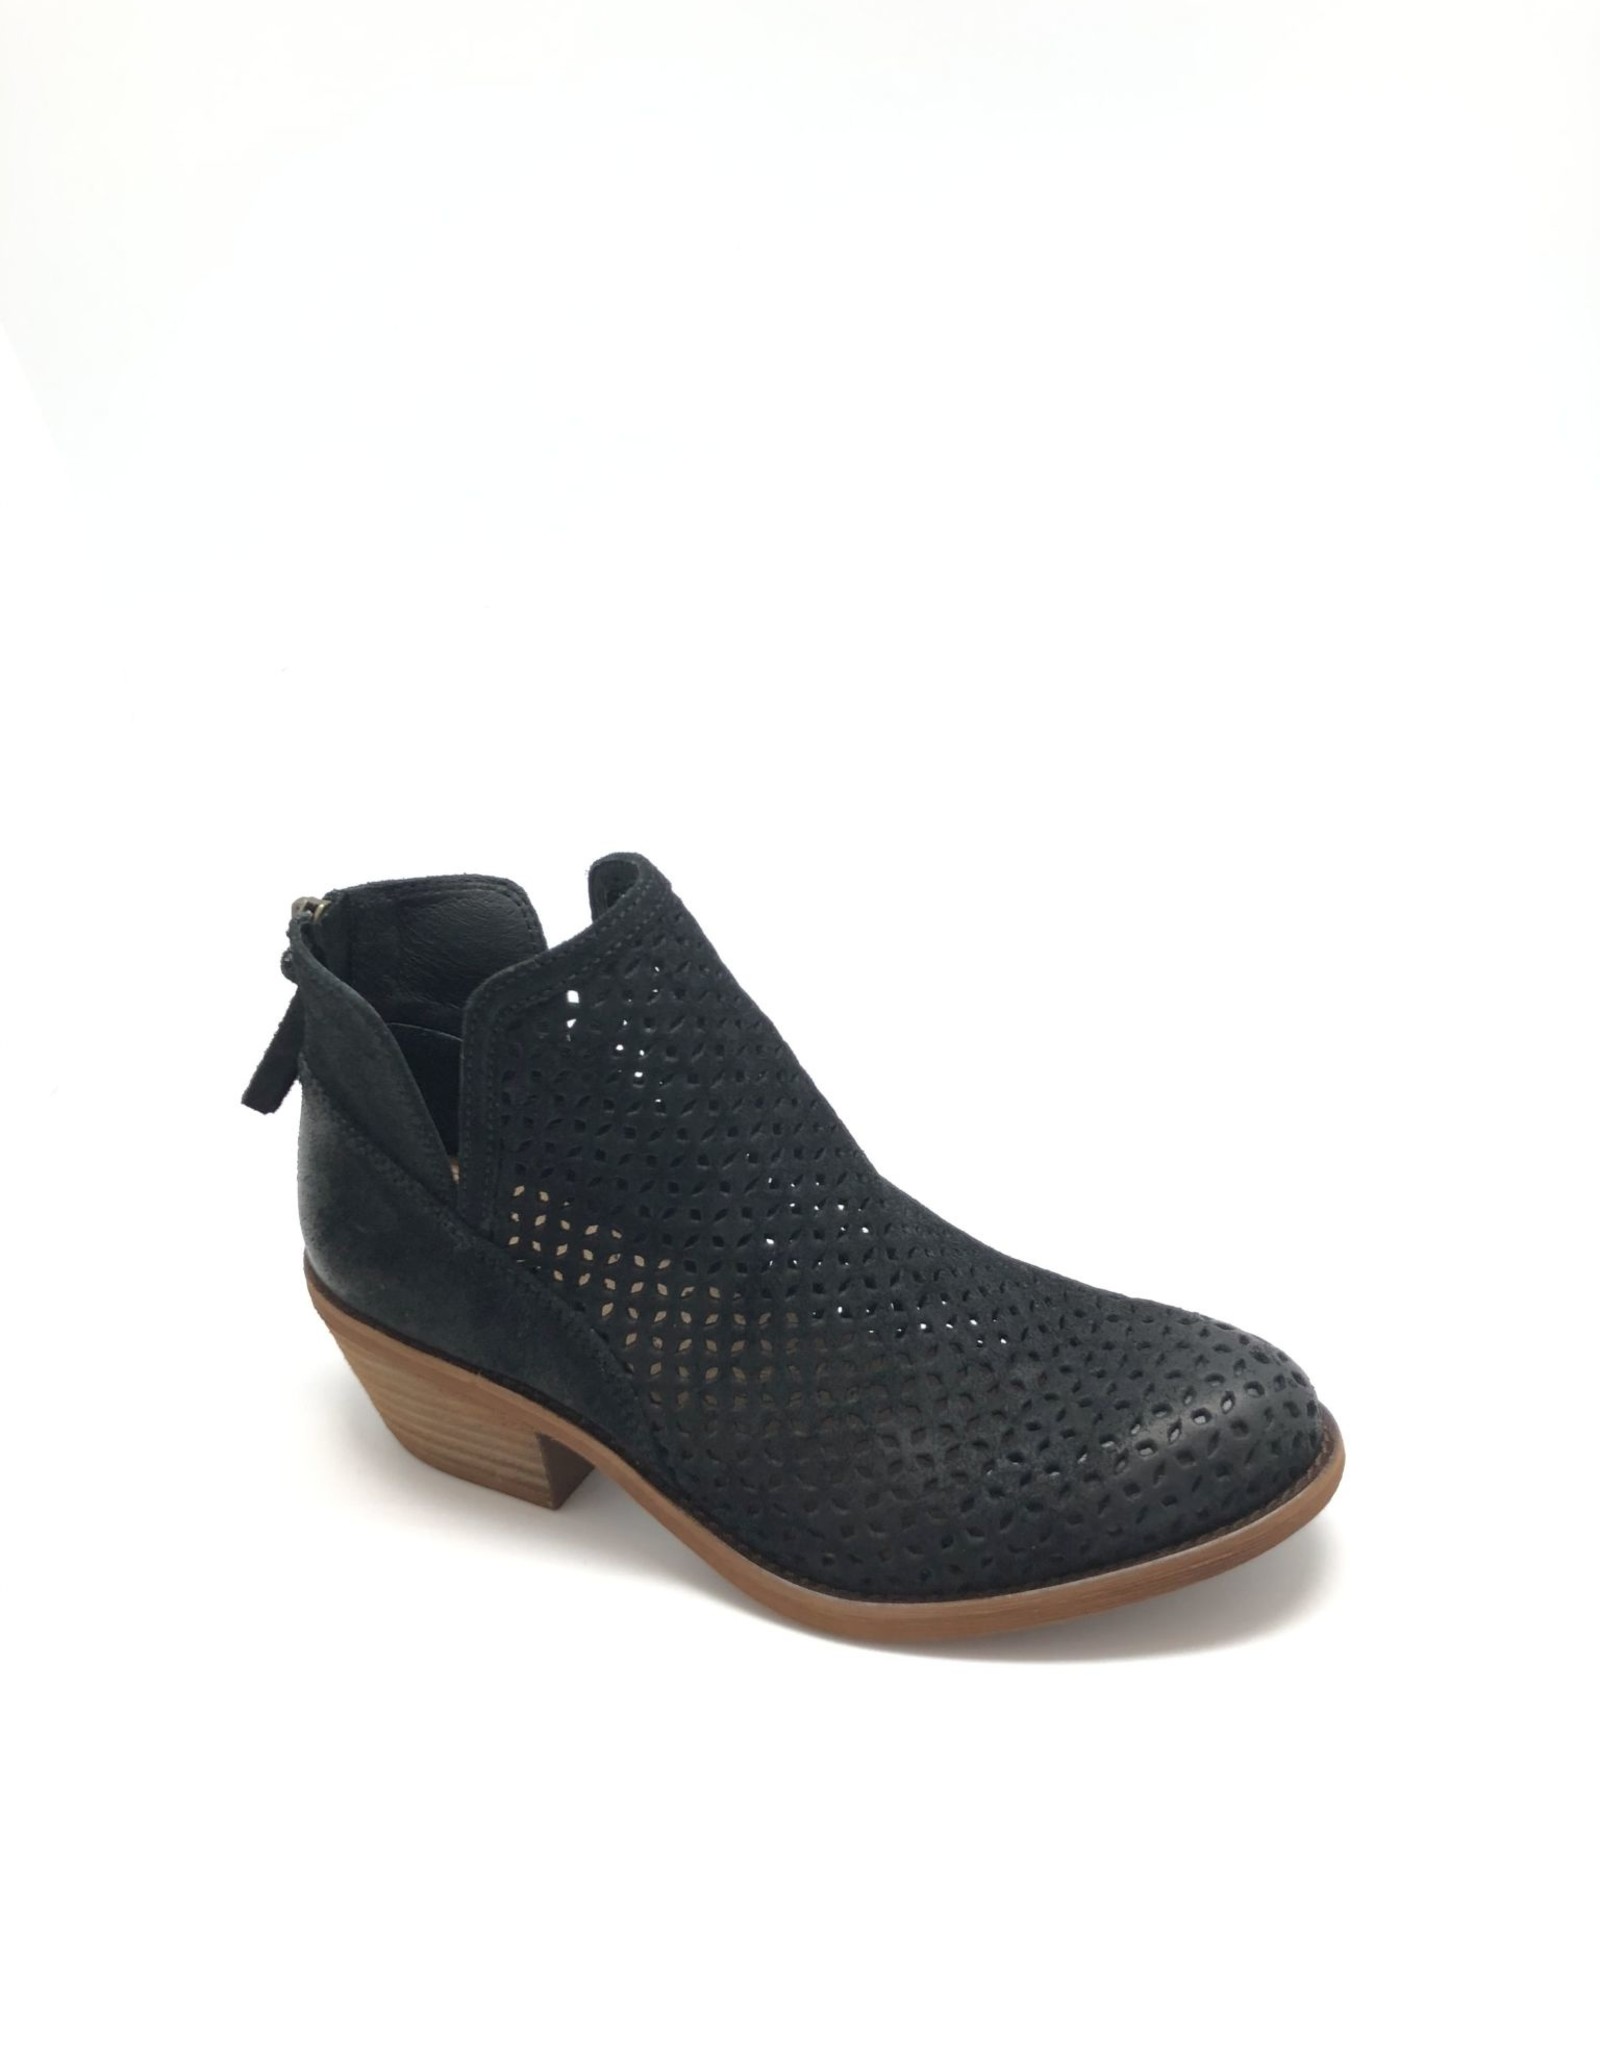 sofft dress shoes